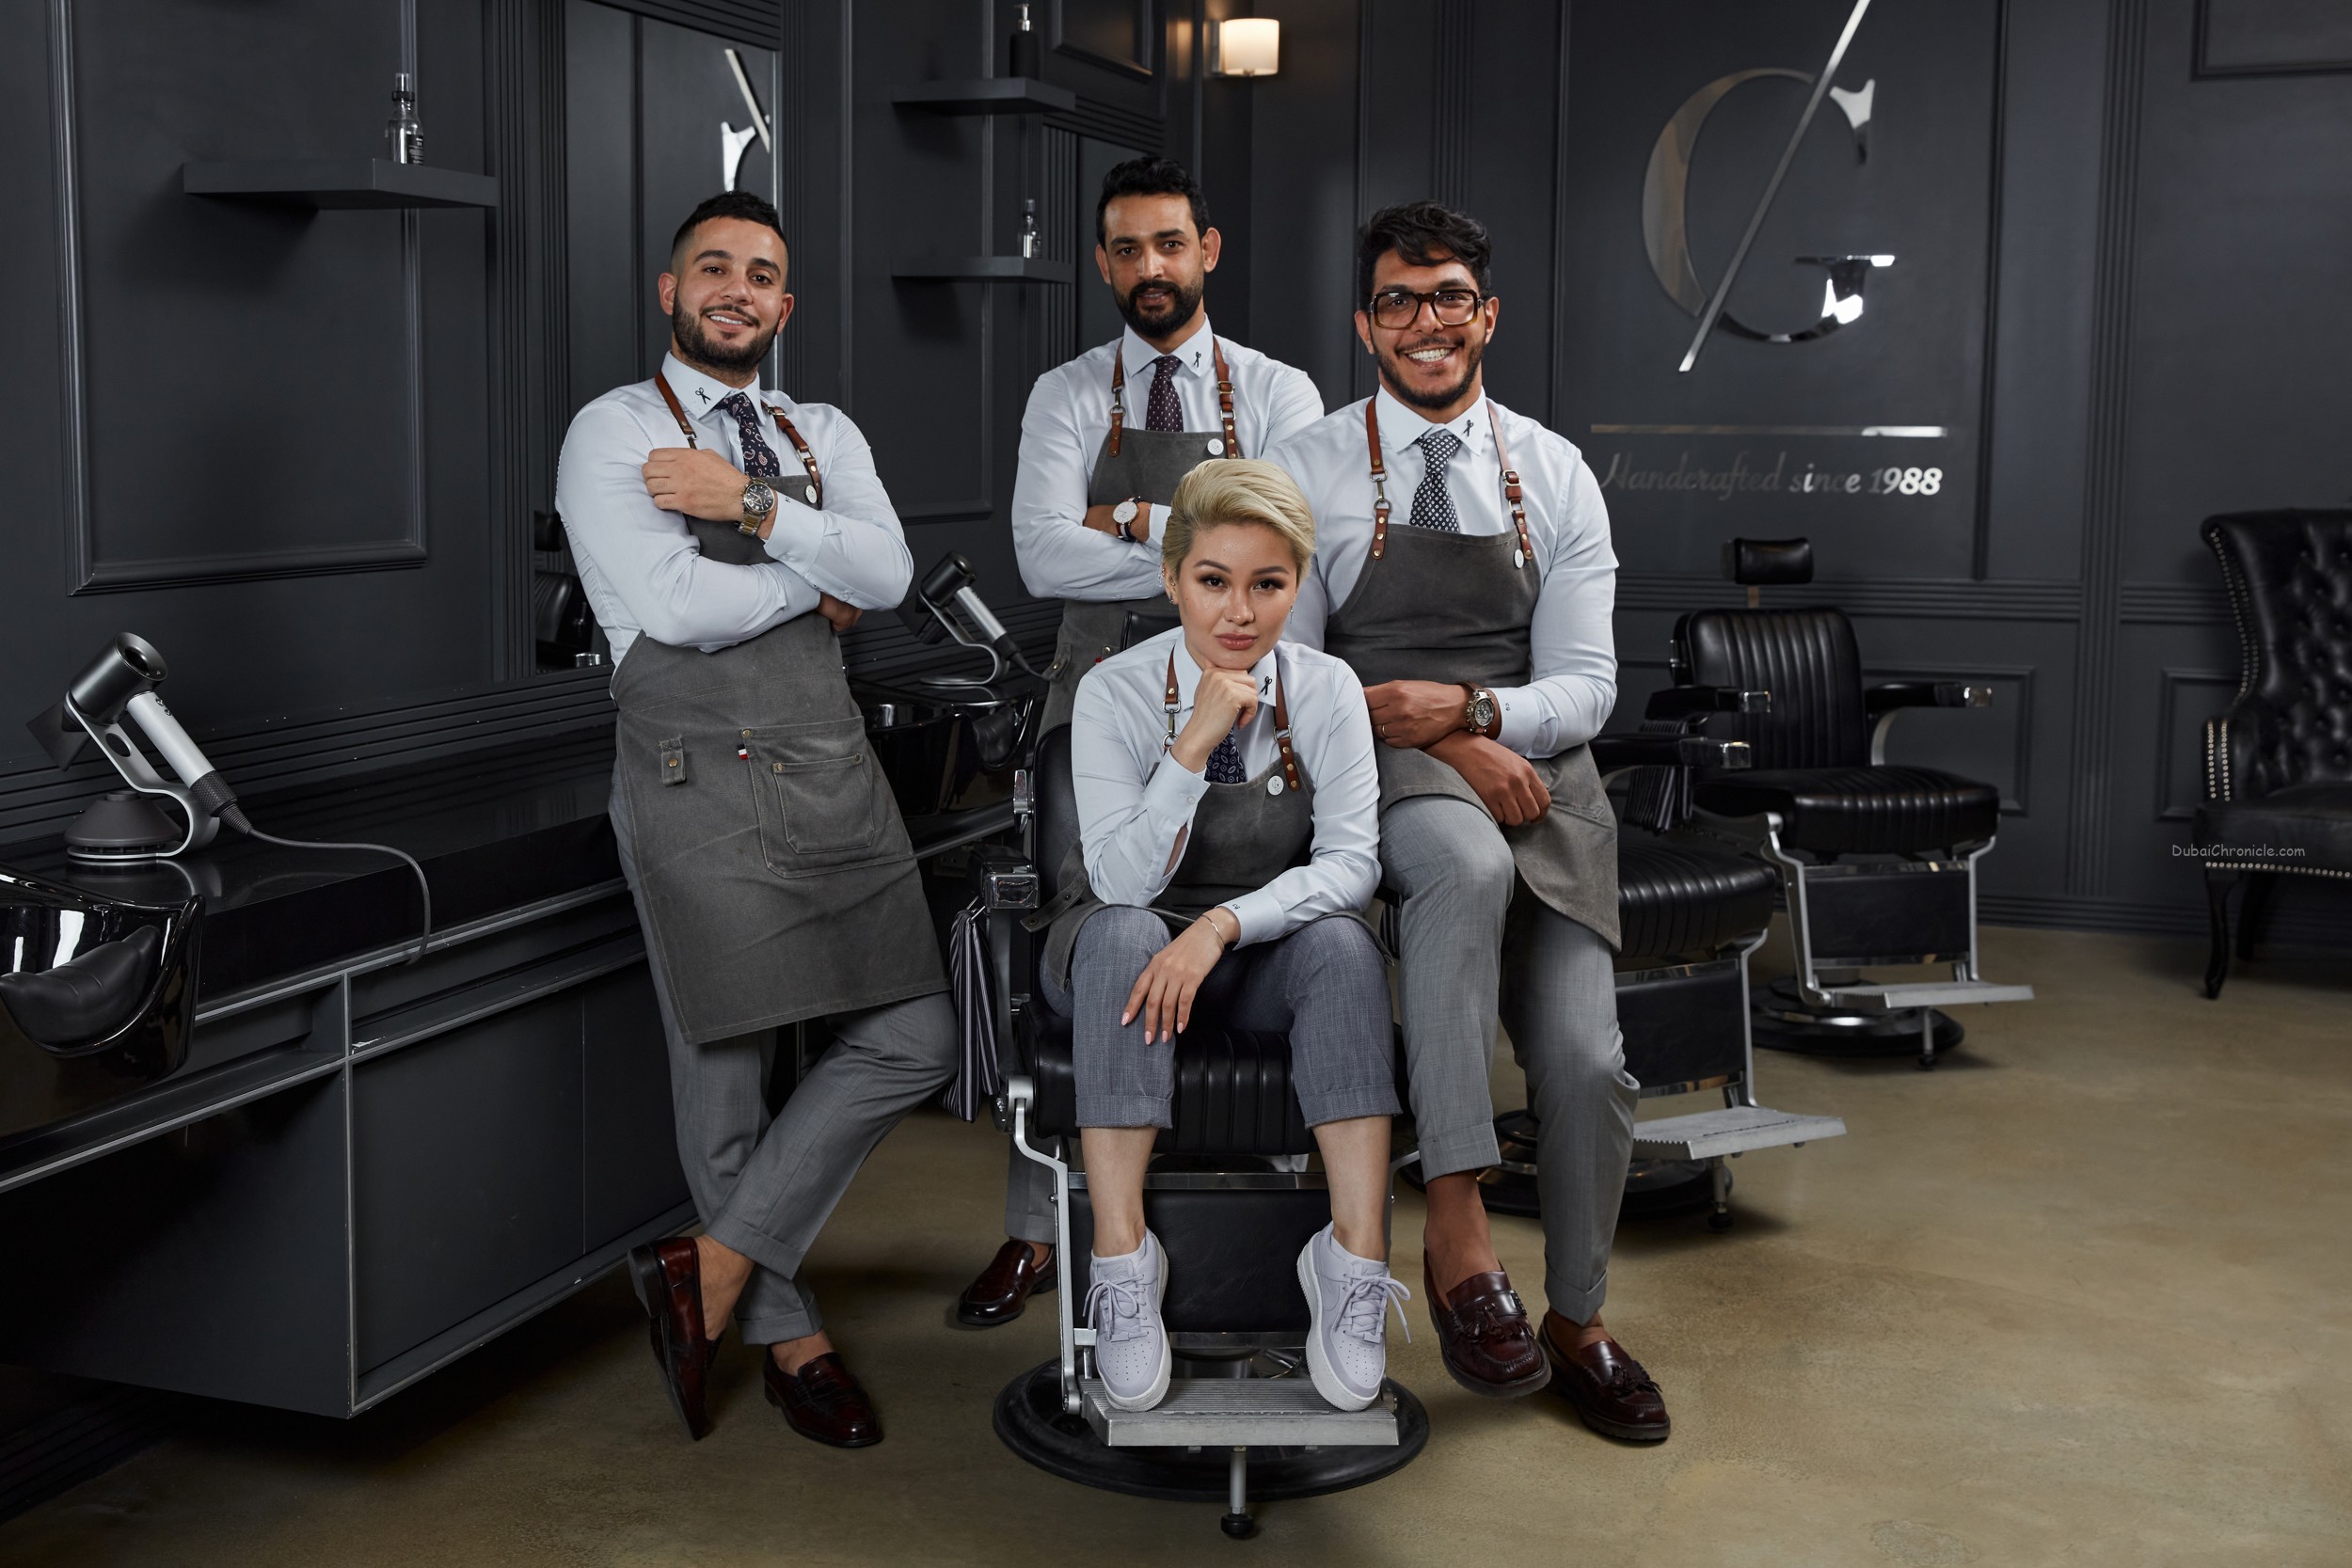 CG Barbershop Partners With Stop and Help To Offer Free Haircuts